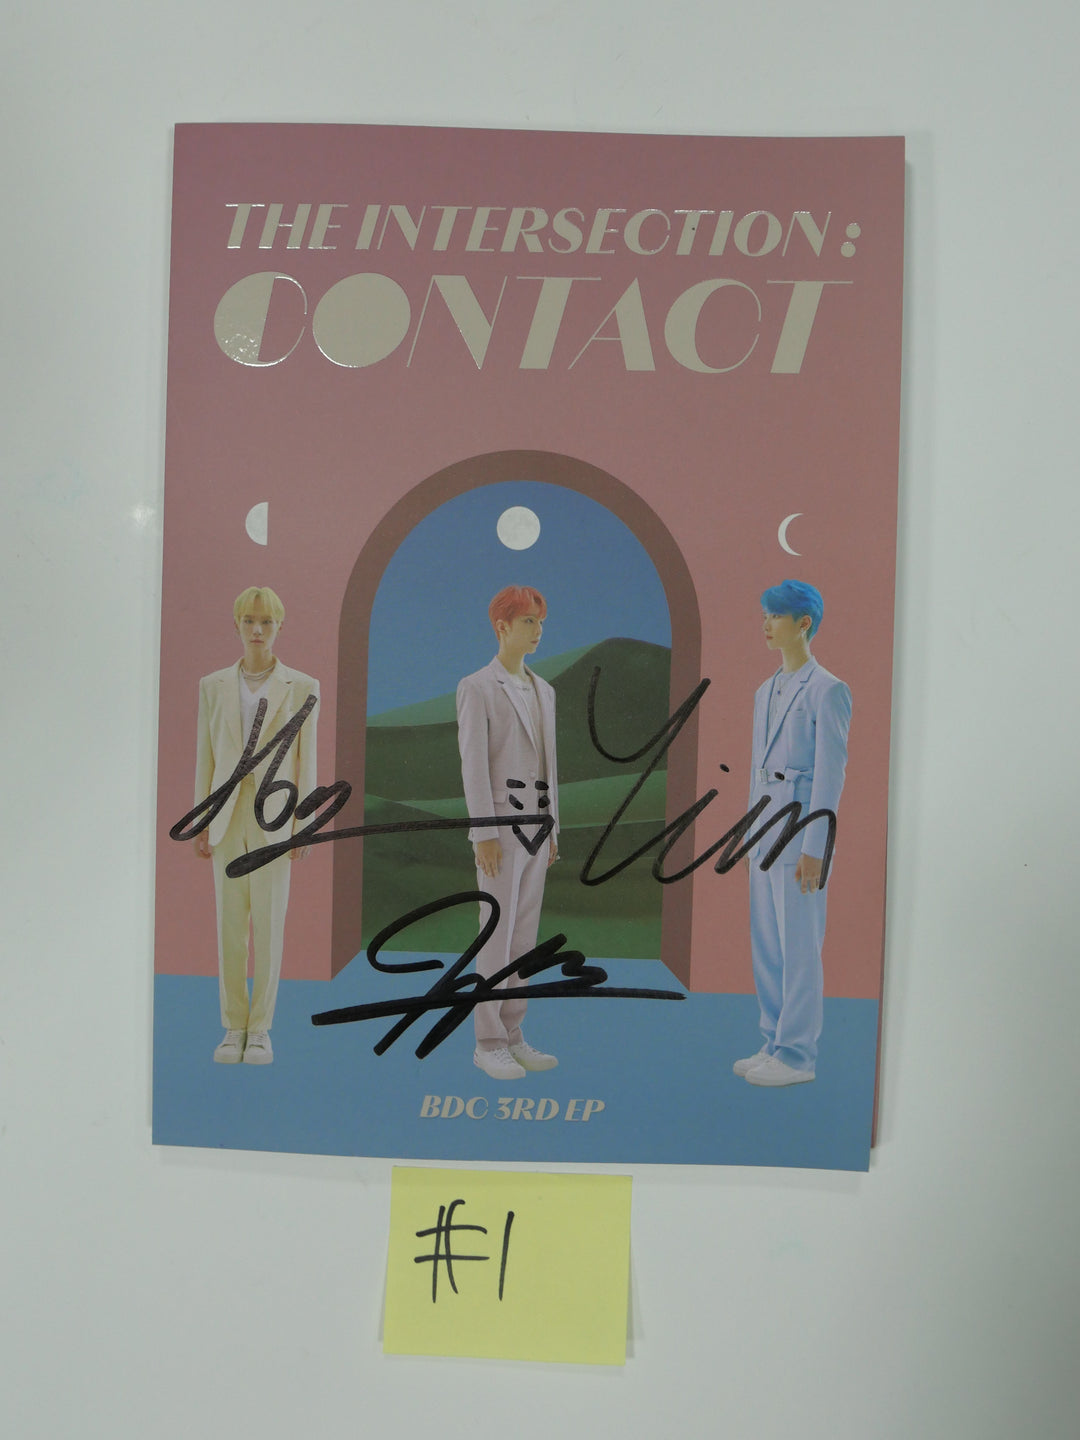 BDC "Contact" 3rd - Hand Autographed (Signed) Promo Album